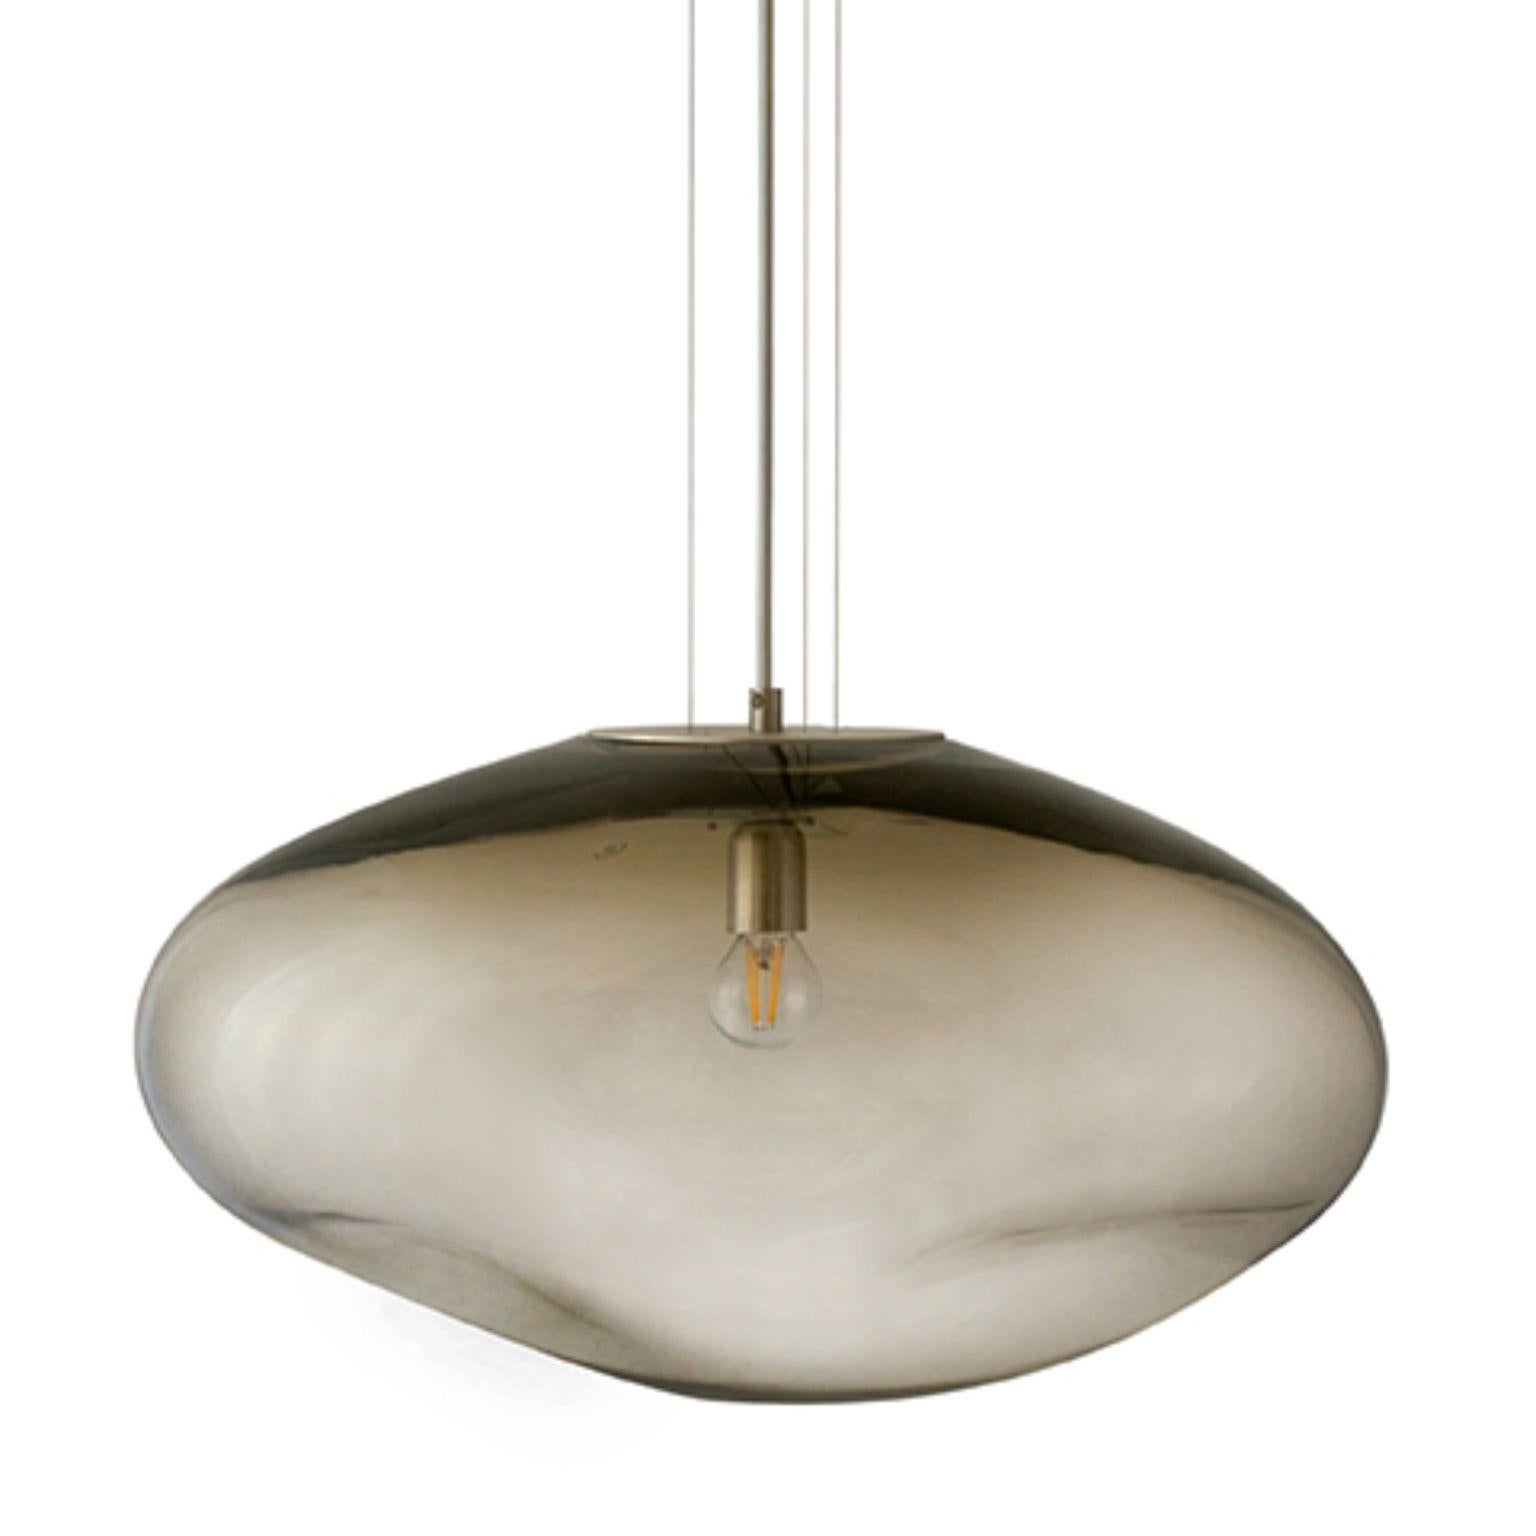 Haumea Amorph silver smoke XL pendant by Eloa
No UL listed 
Material: glass, steel, silver, LED Bulb
Dimensions: D35 x W47 x H32 cm
Also available in different colours and dimensions.

All our lamps can be wired according to each country. If sold to